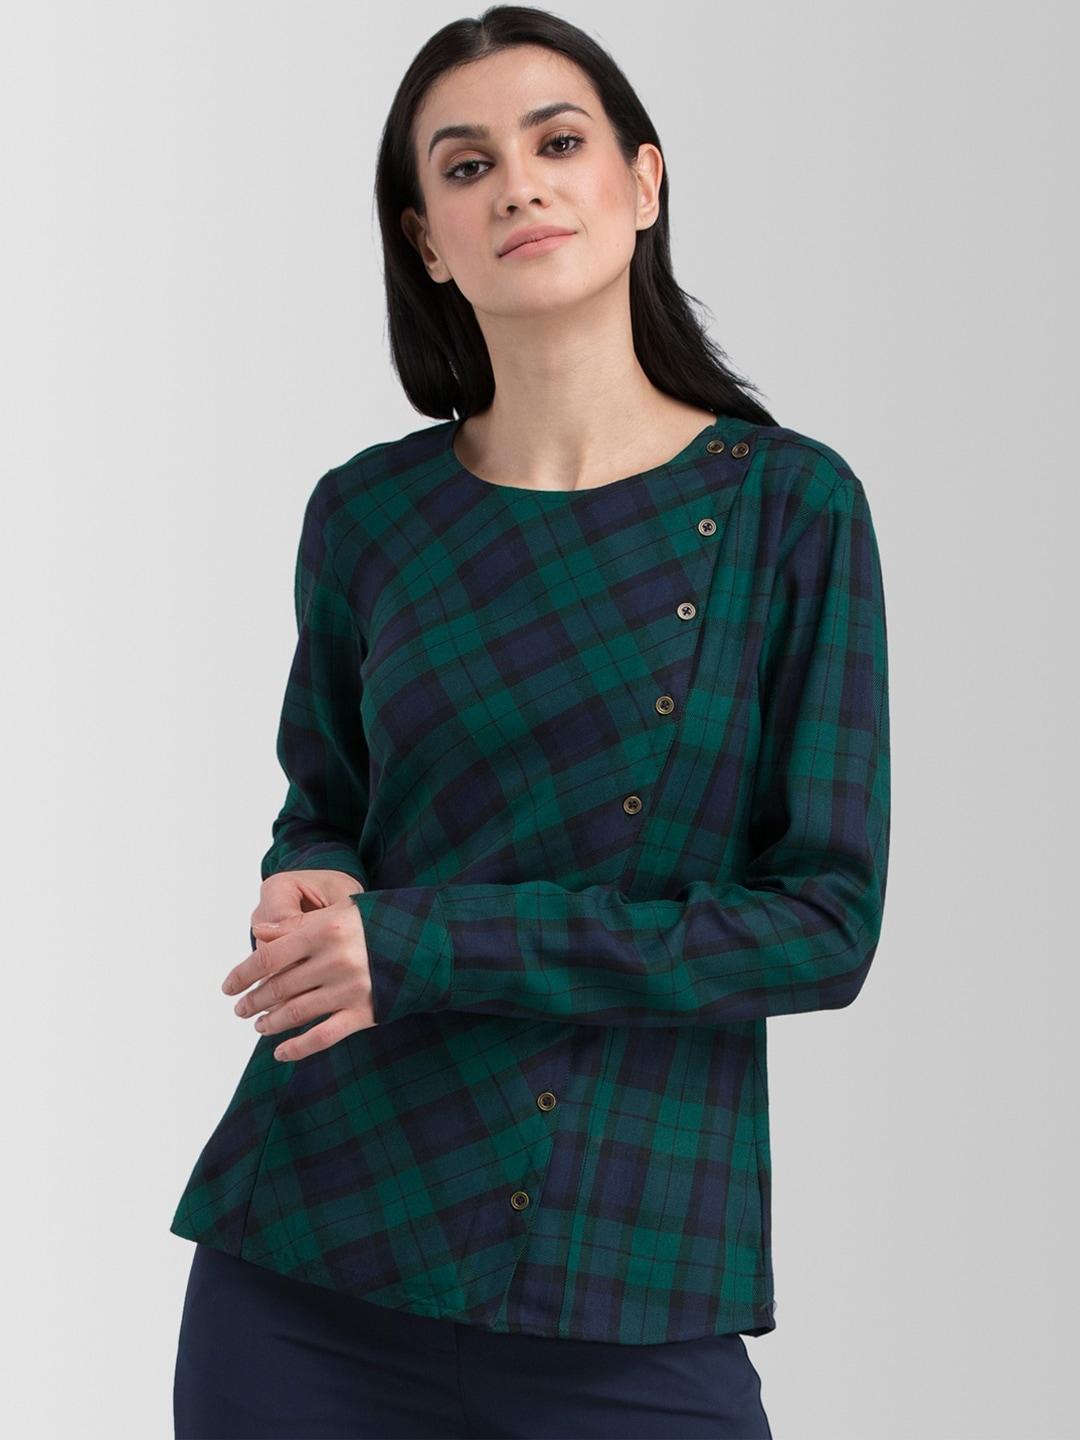 fablestreet-women-green-&-navy-blue-checked-top